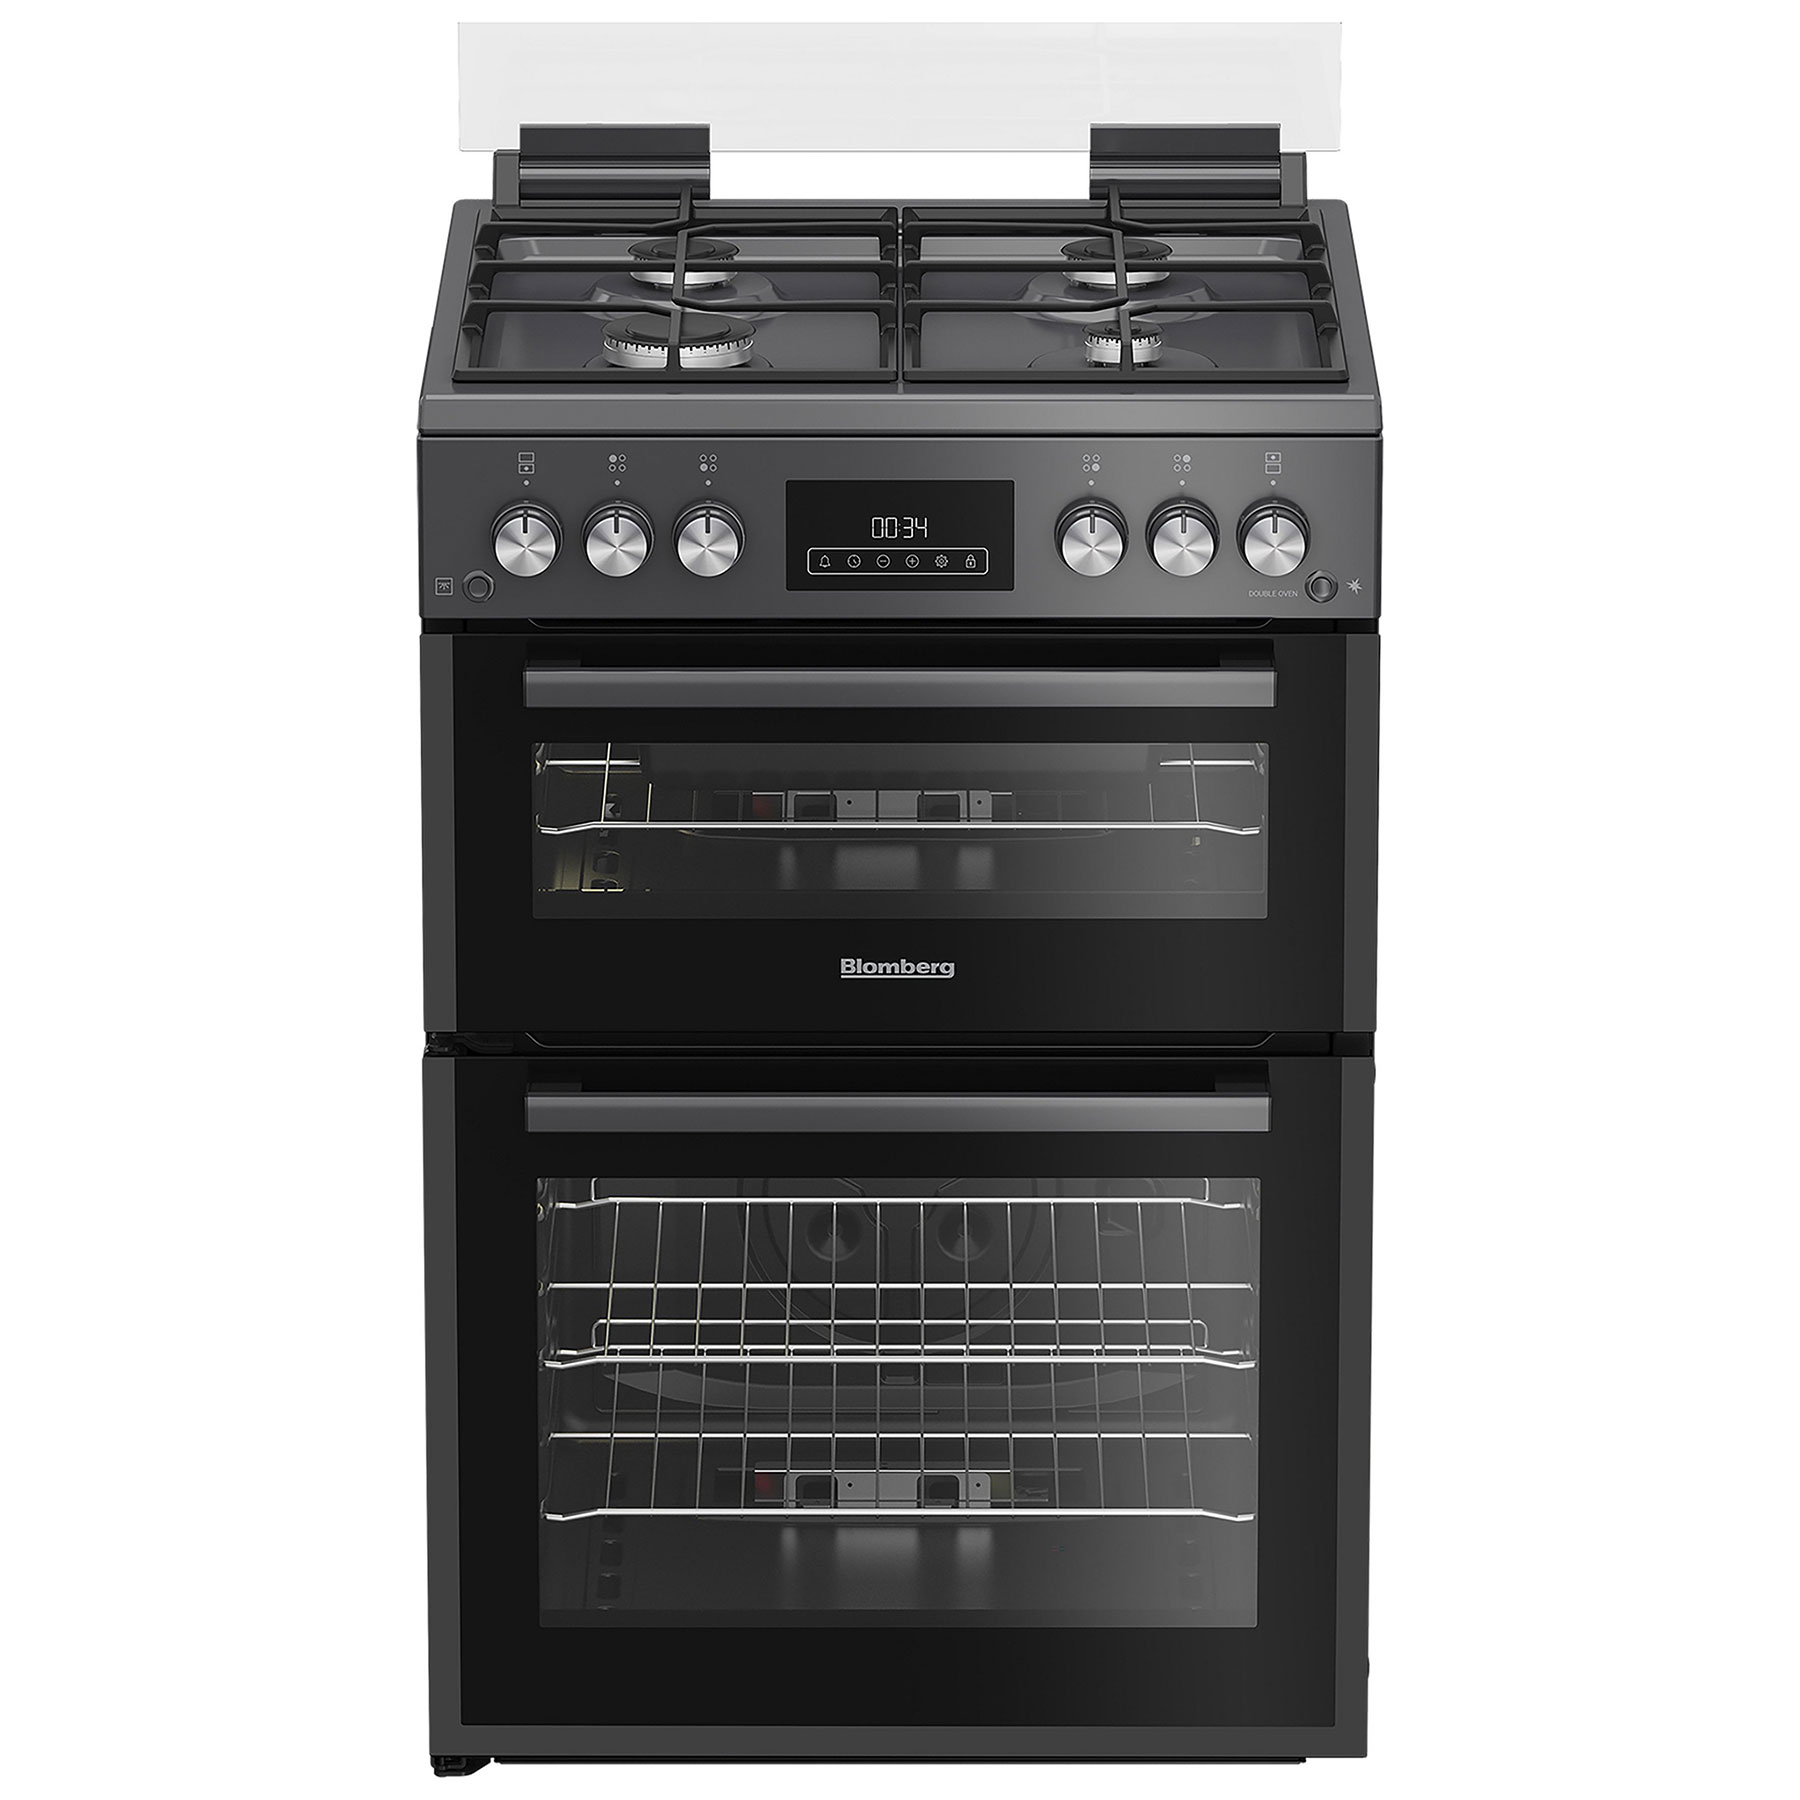 Image of Blomberg GGRN655N 60cm Double Oven Gas Cooker in Anthracite 72 32 Litr